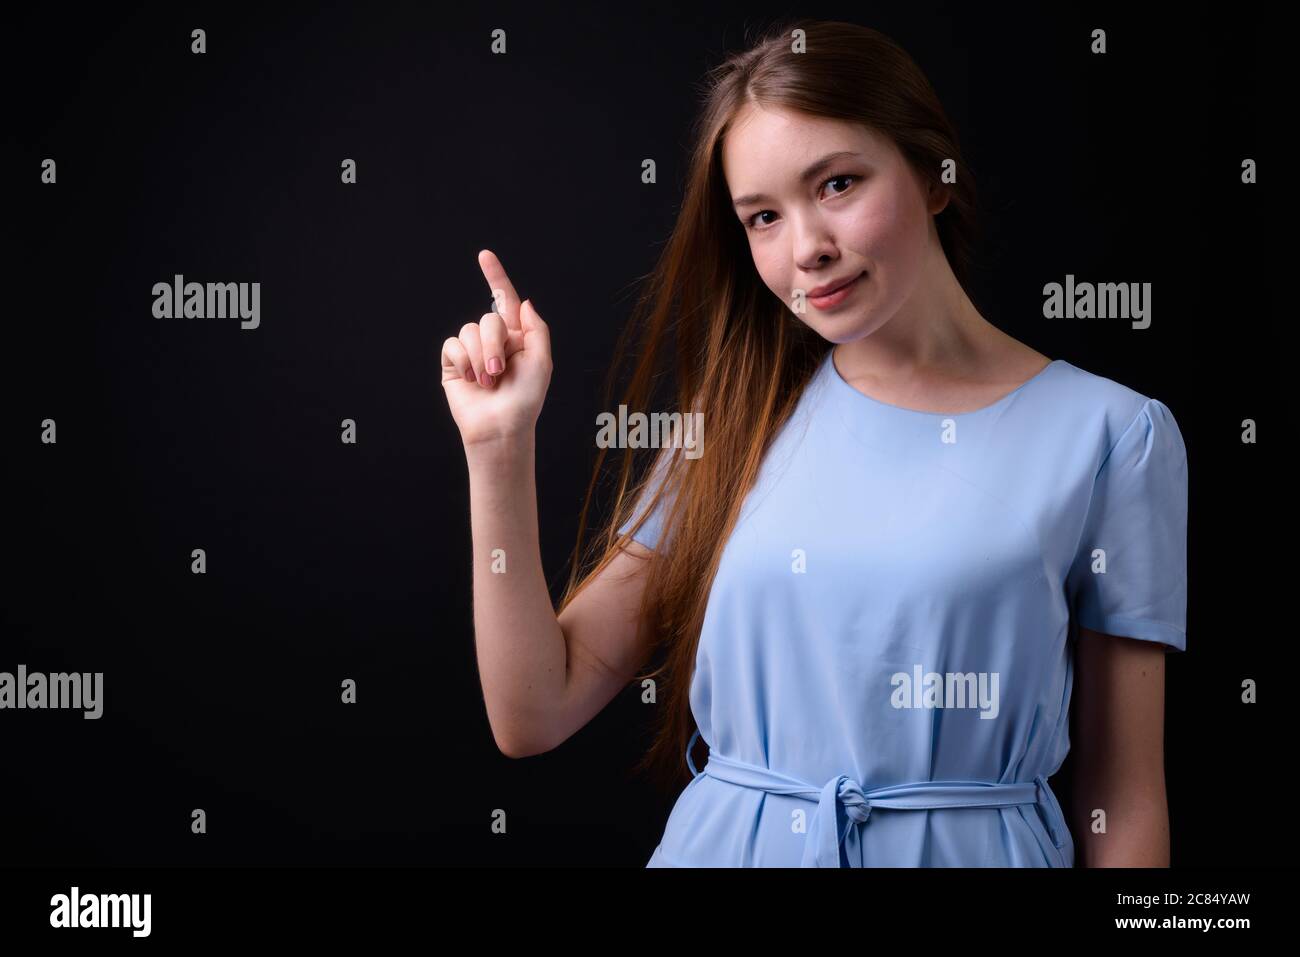 Young beautiful woman with long brown hair against black background Stock Photo